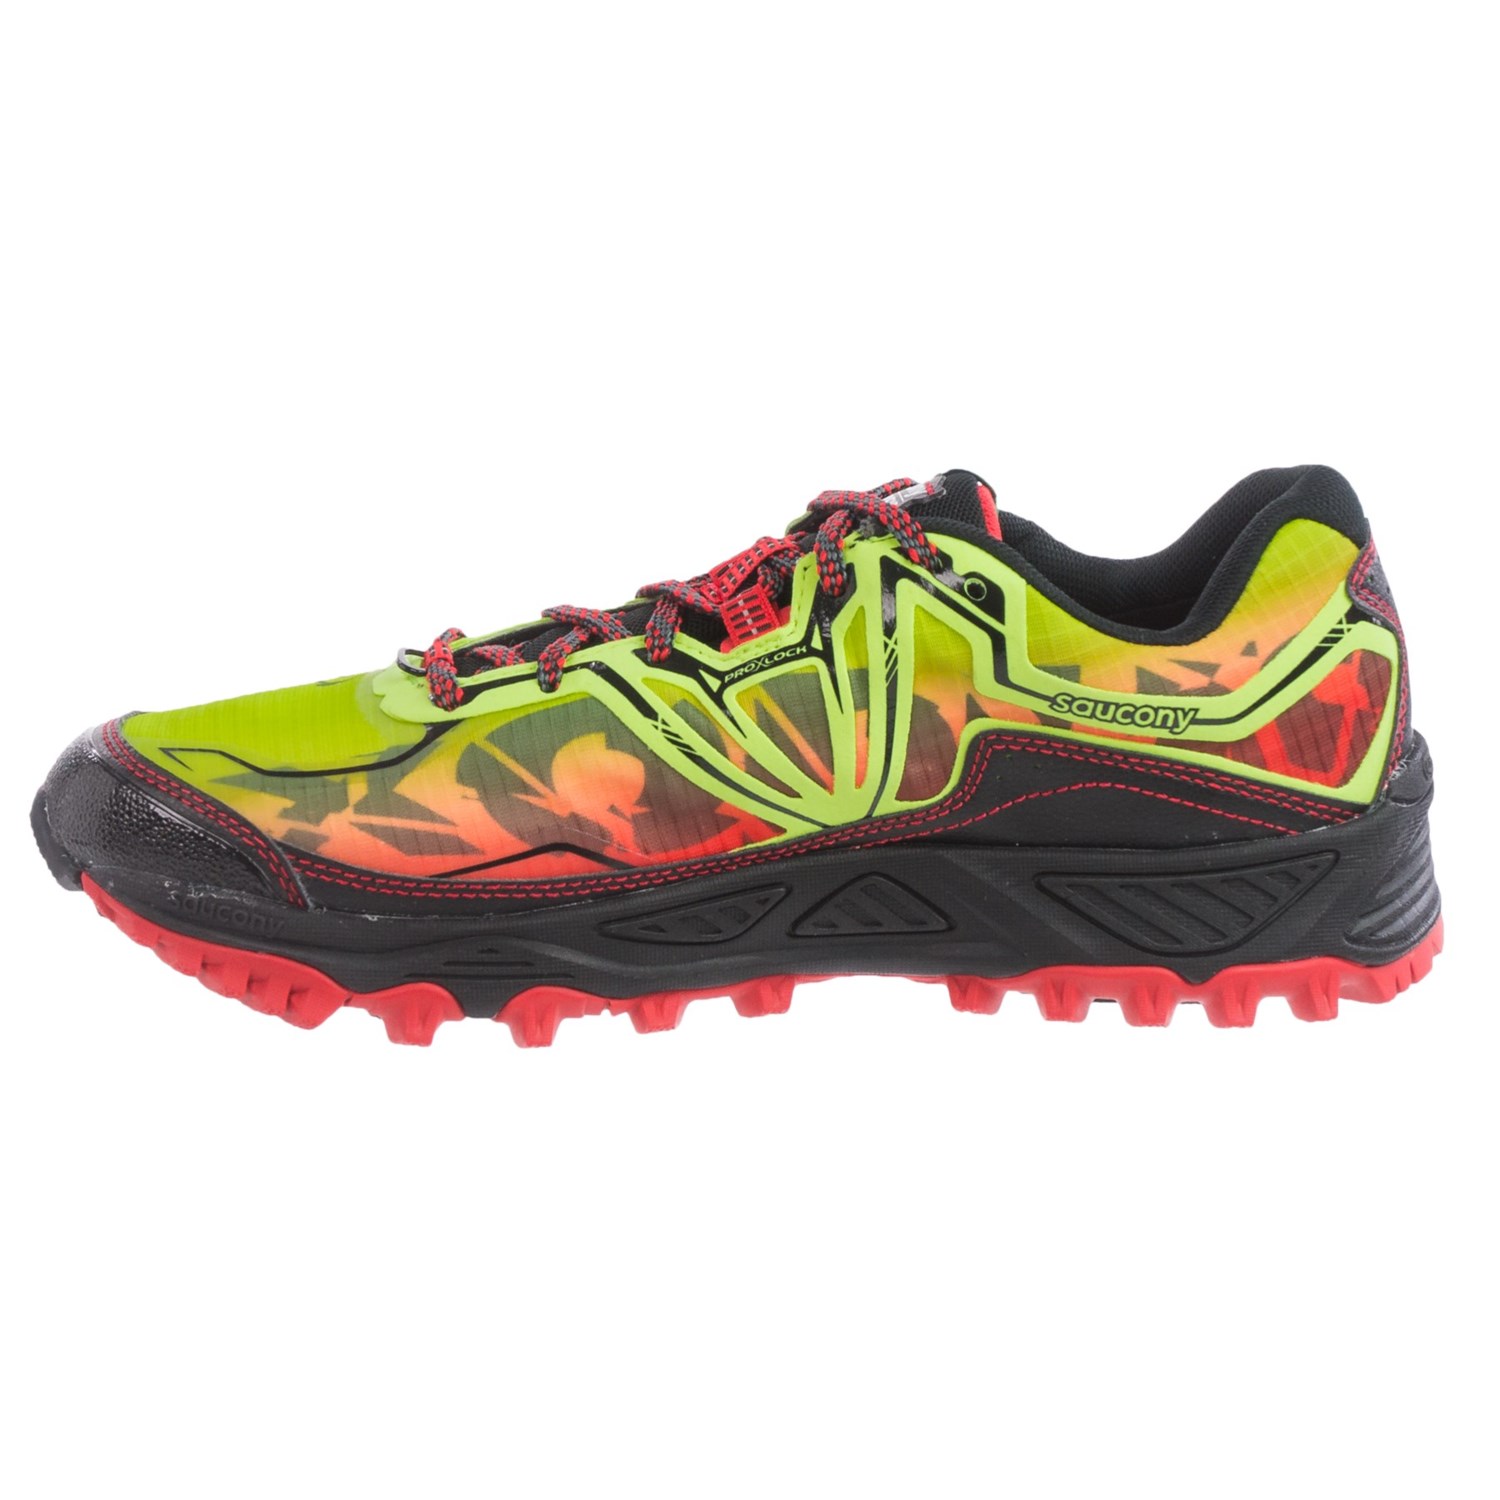 saucony waterproof trail running shoes -